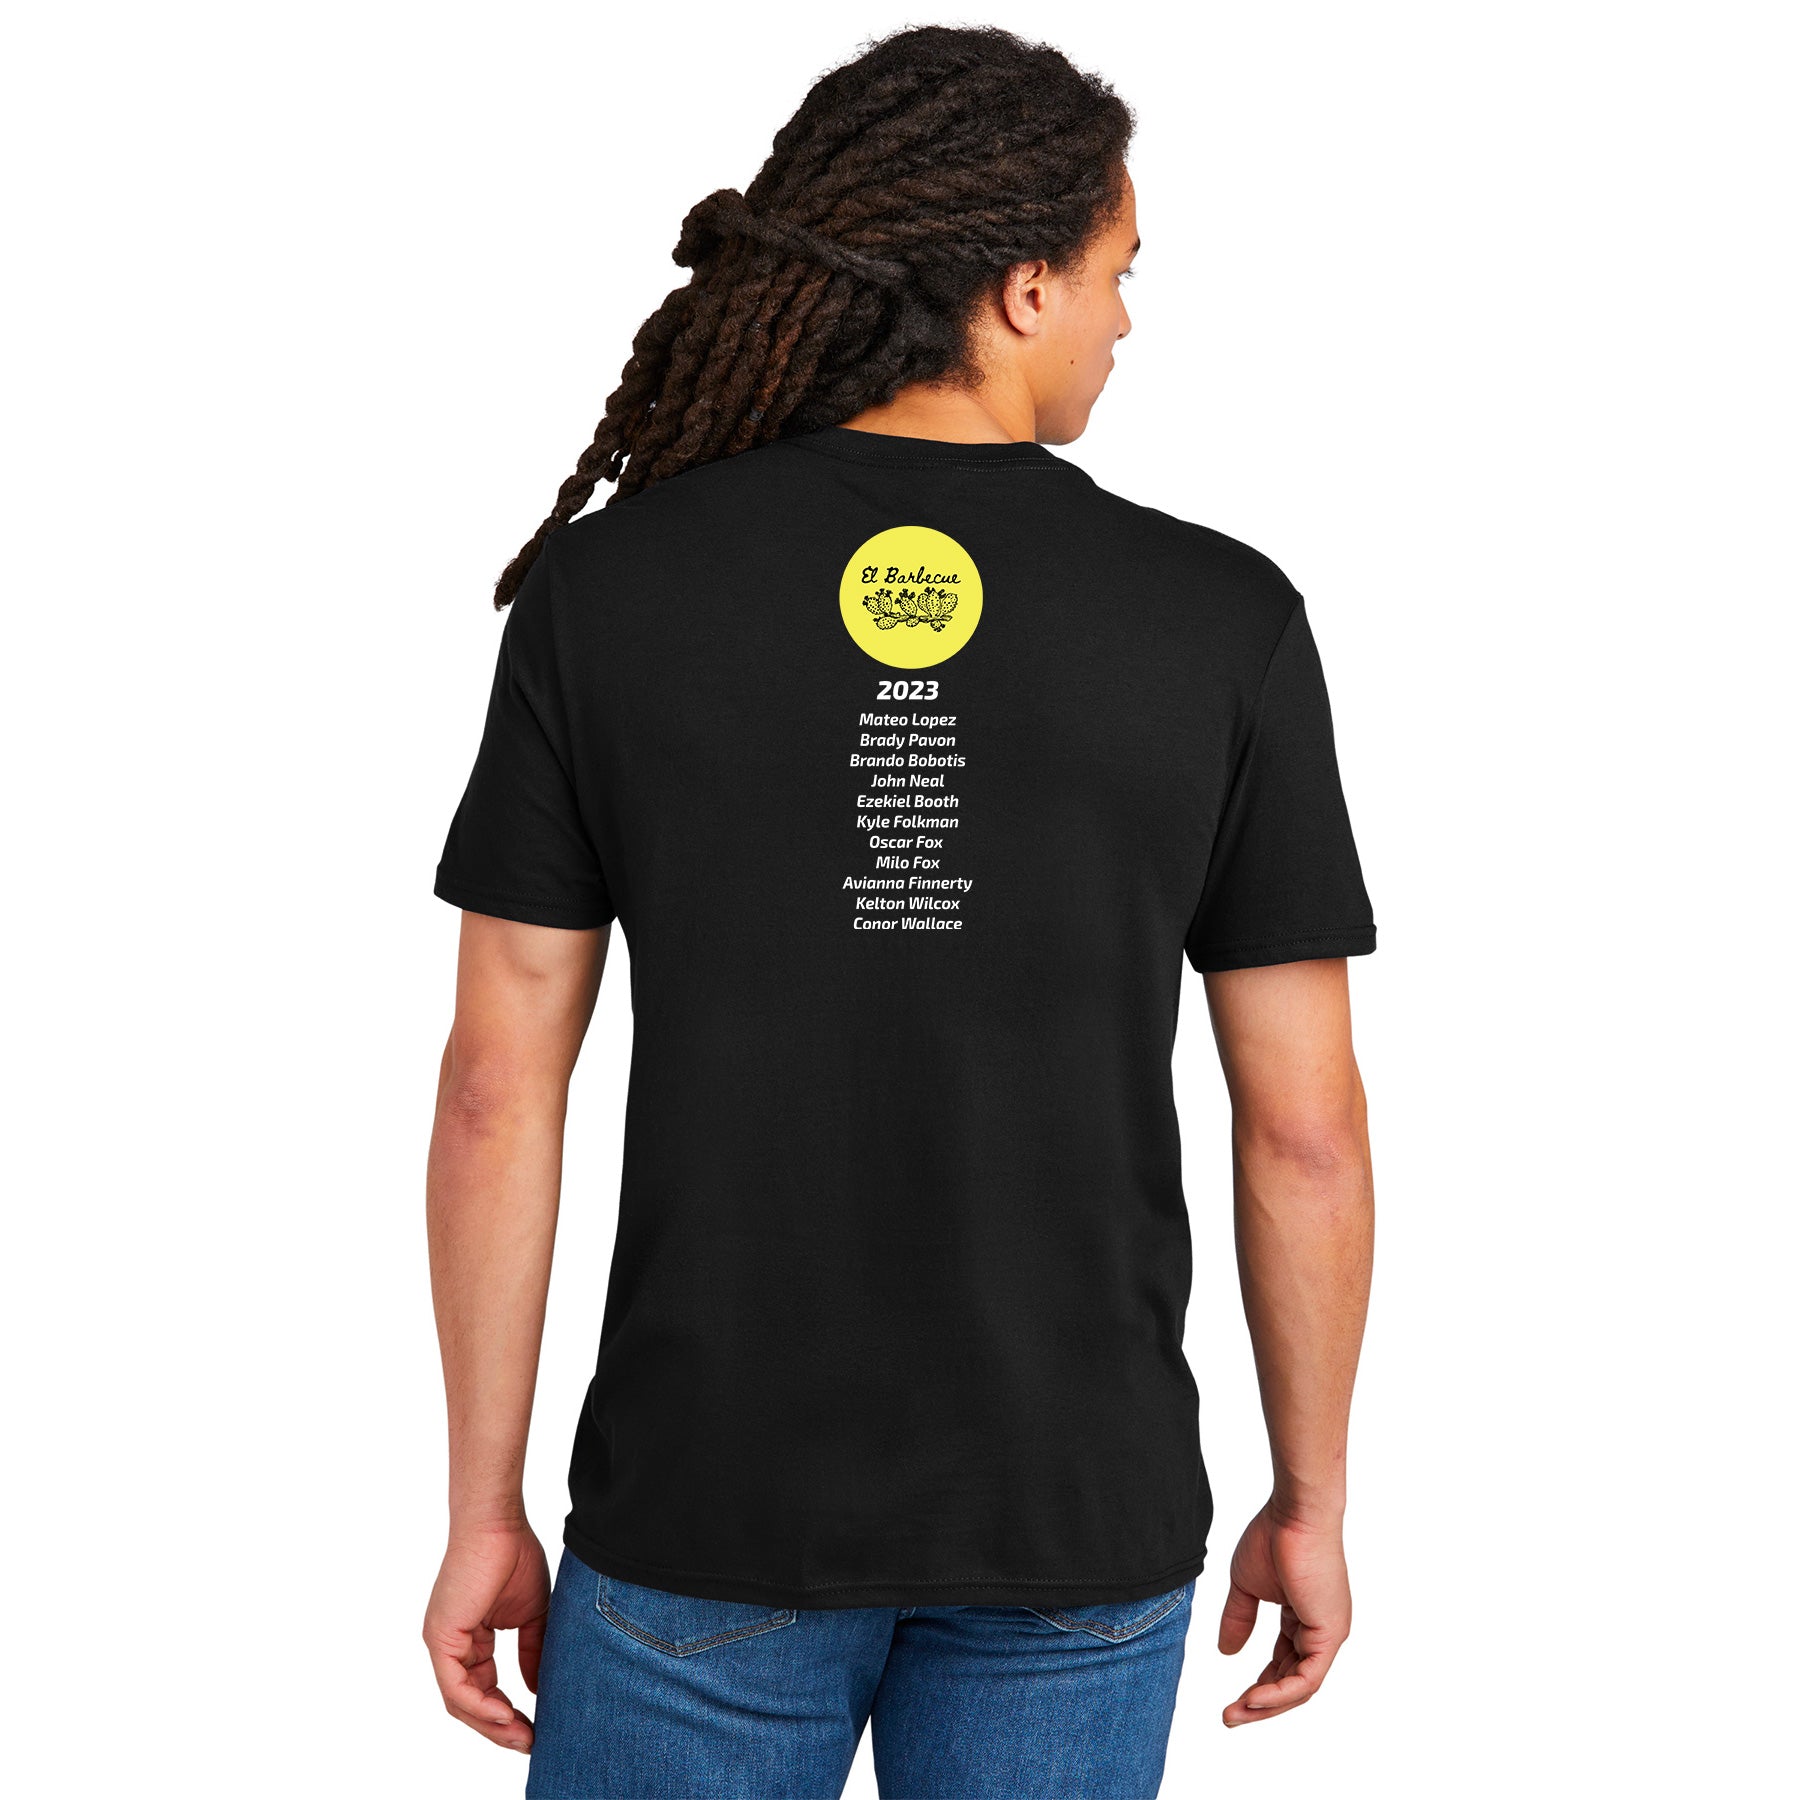 KILLER BEES ROSTER CLASSIC T-SHIRT